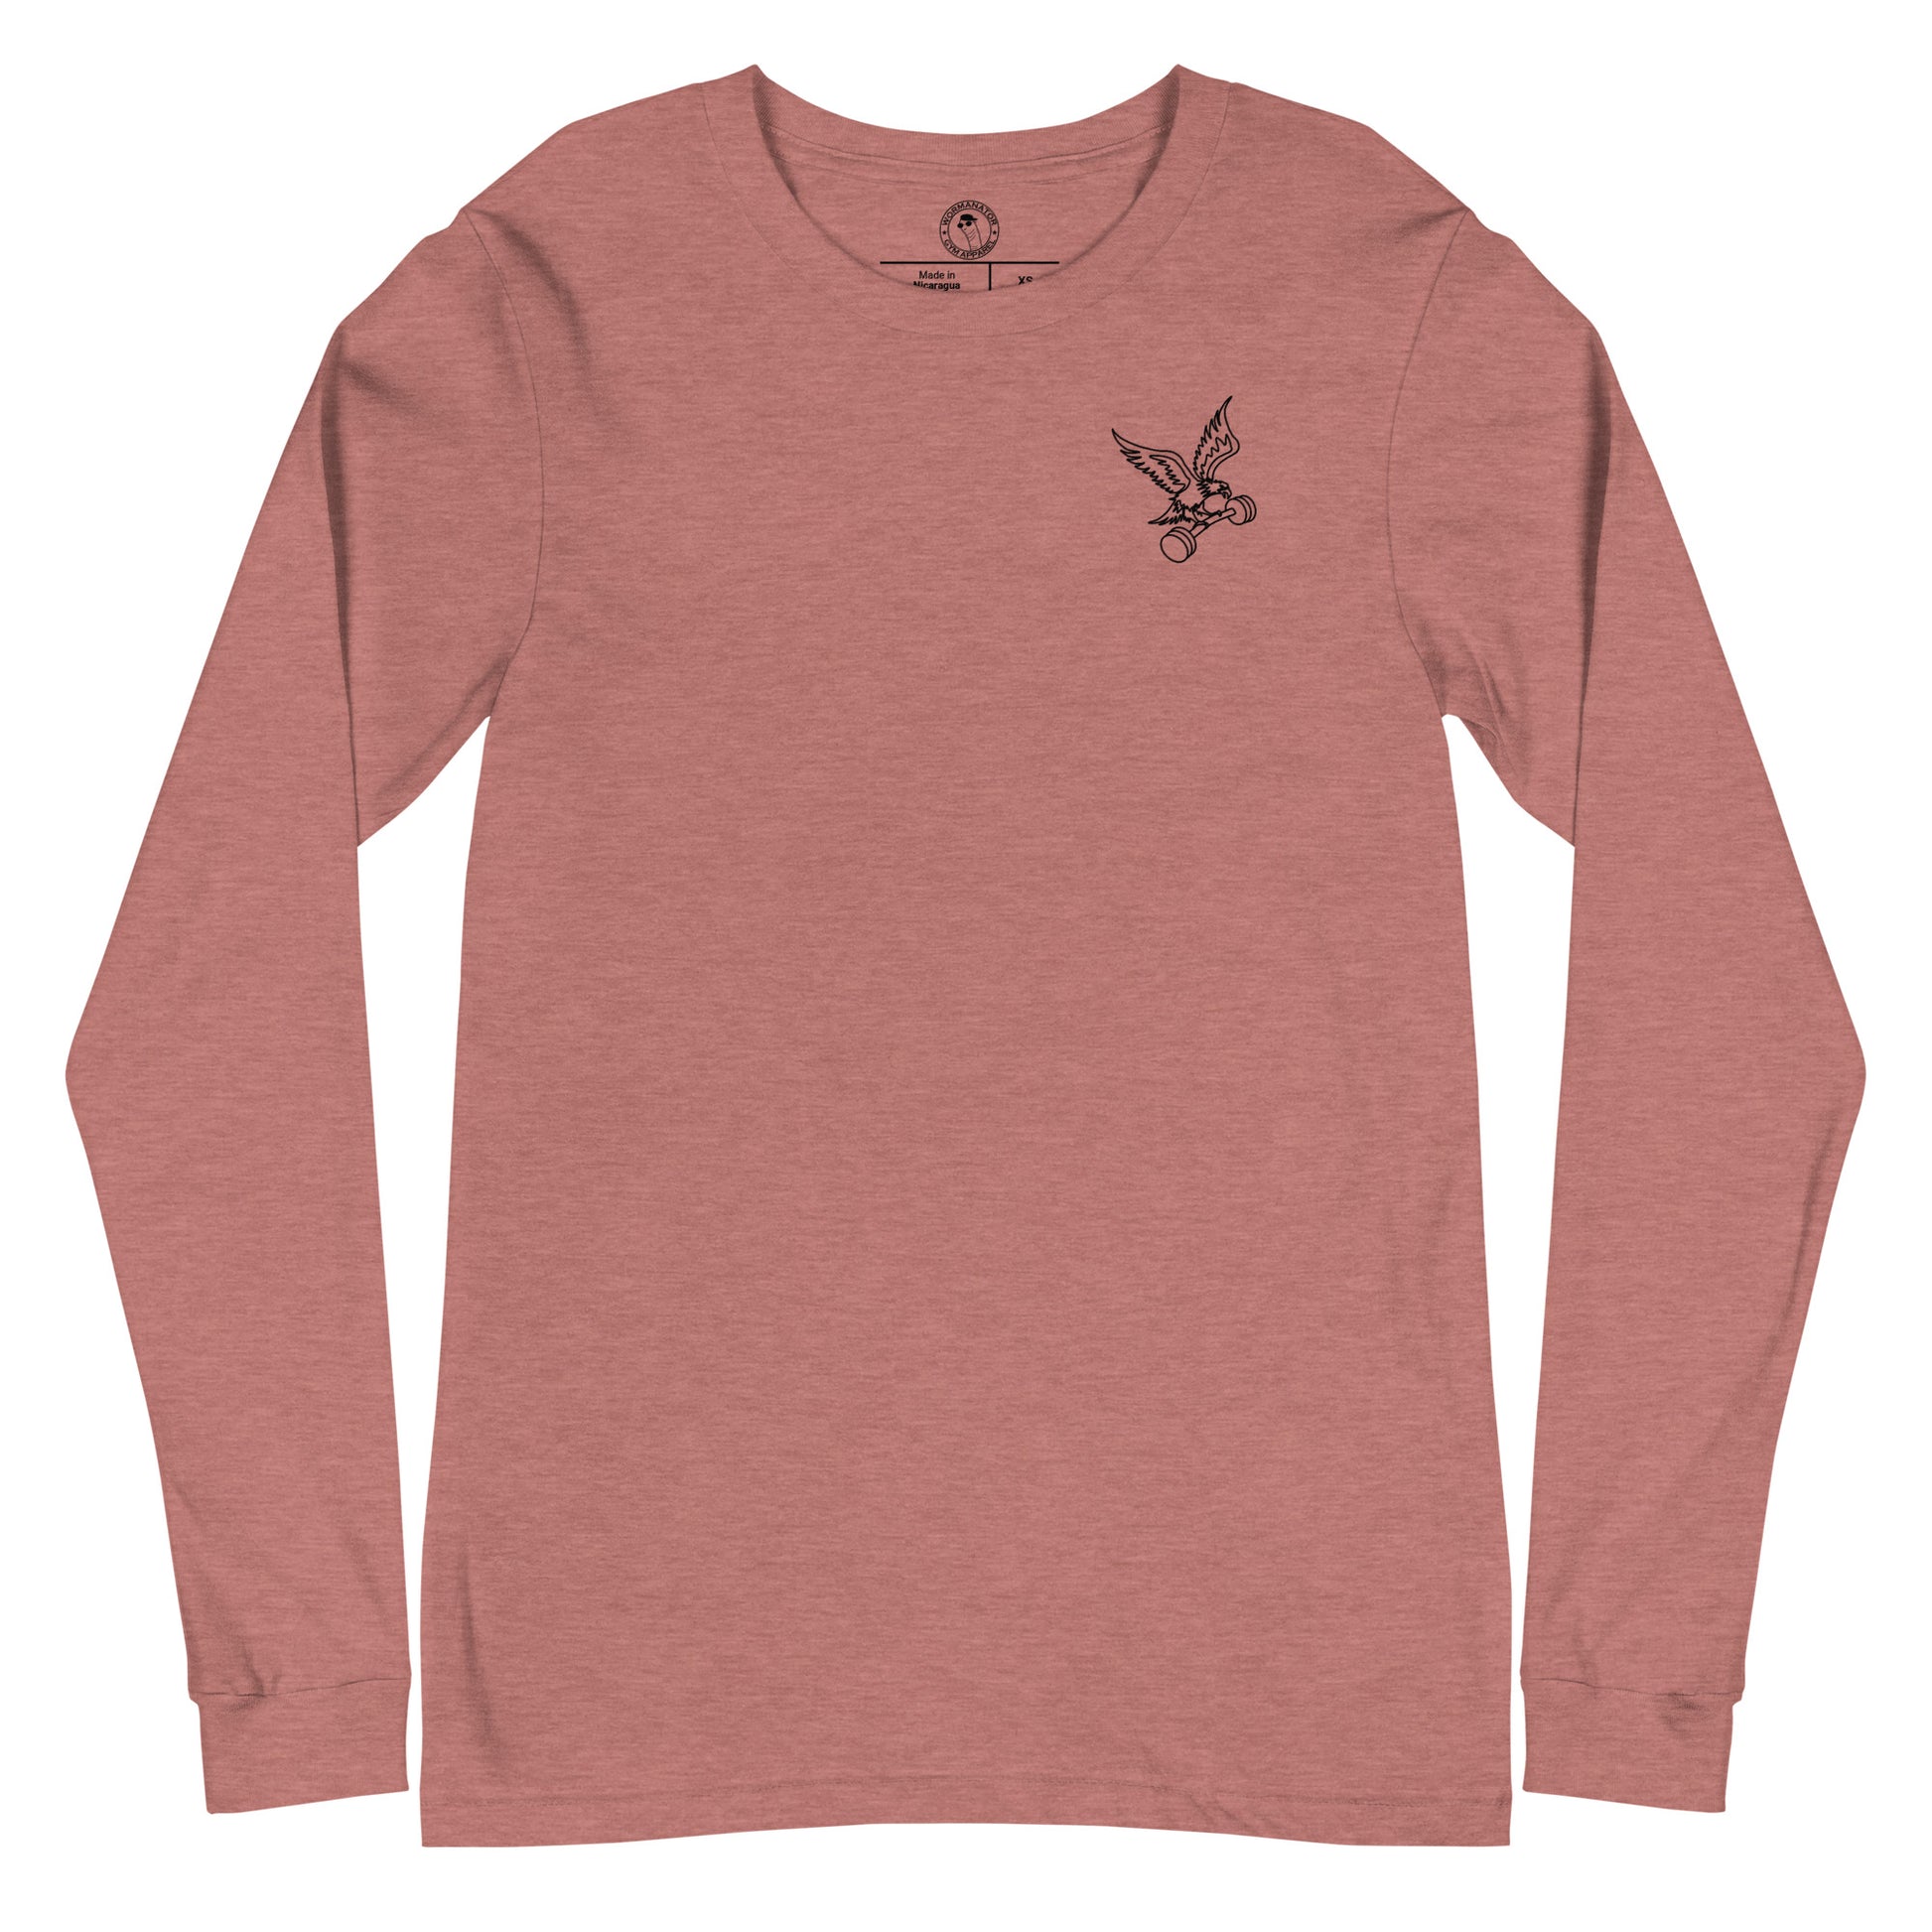 Unisex Barbell Eagle Long Sleeve Shirt in Heather Mauve